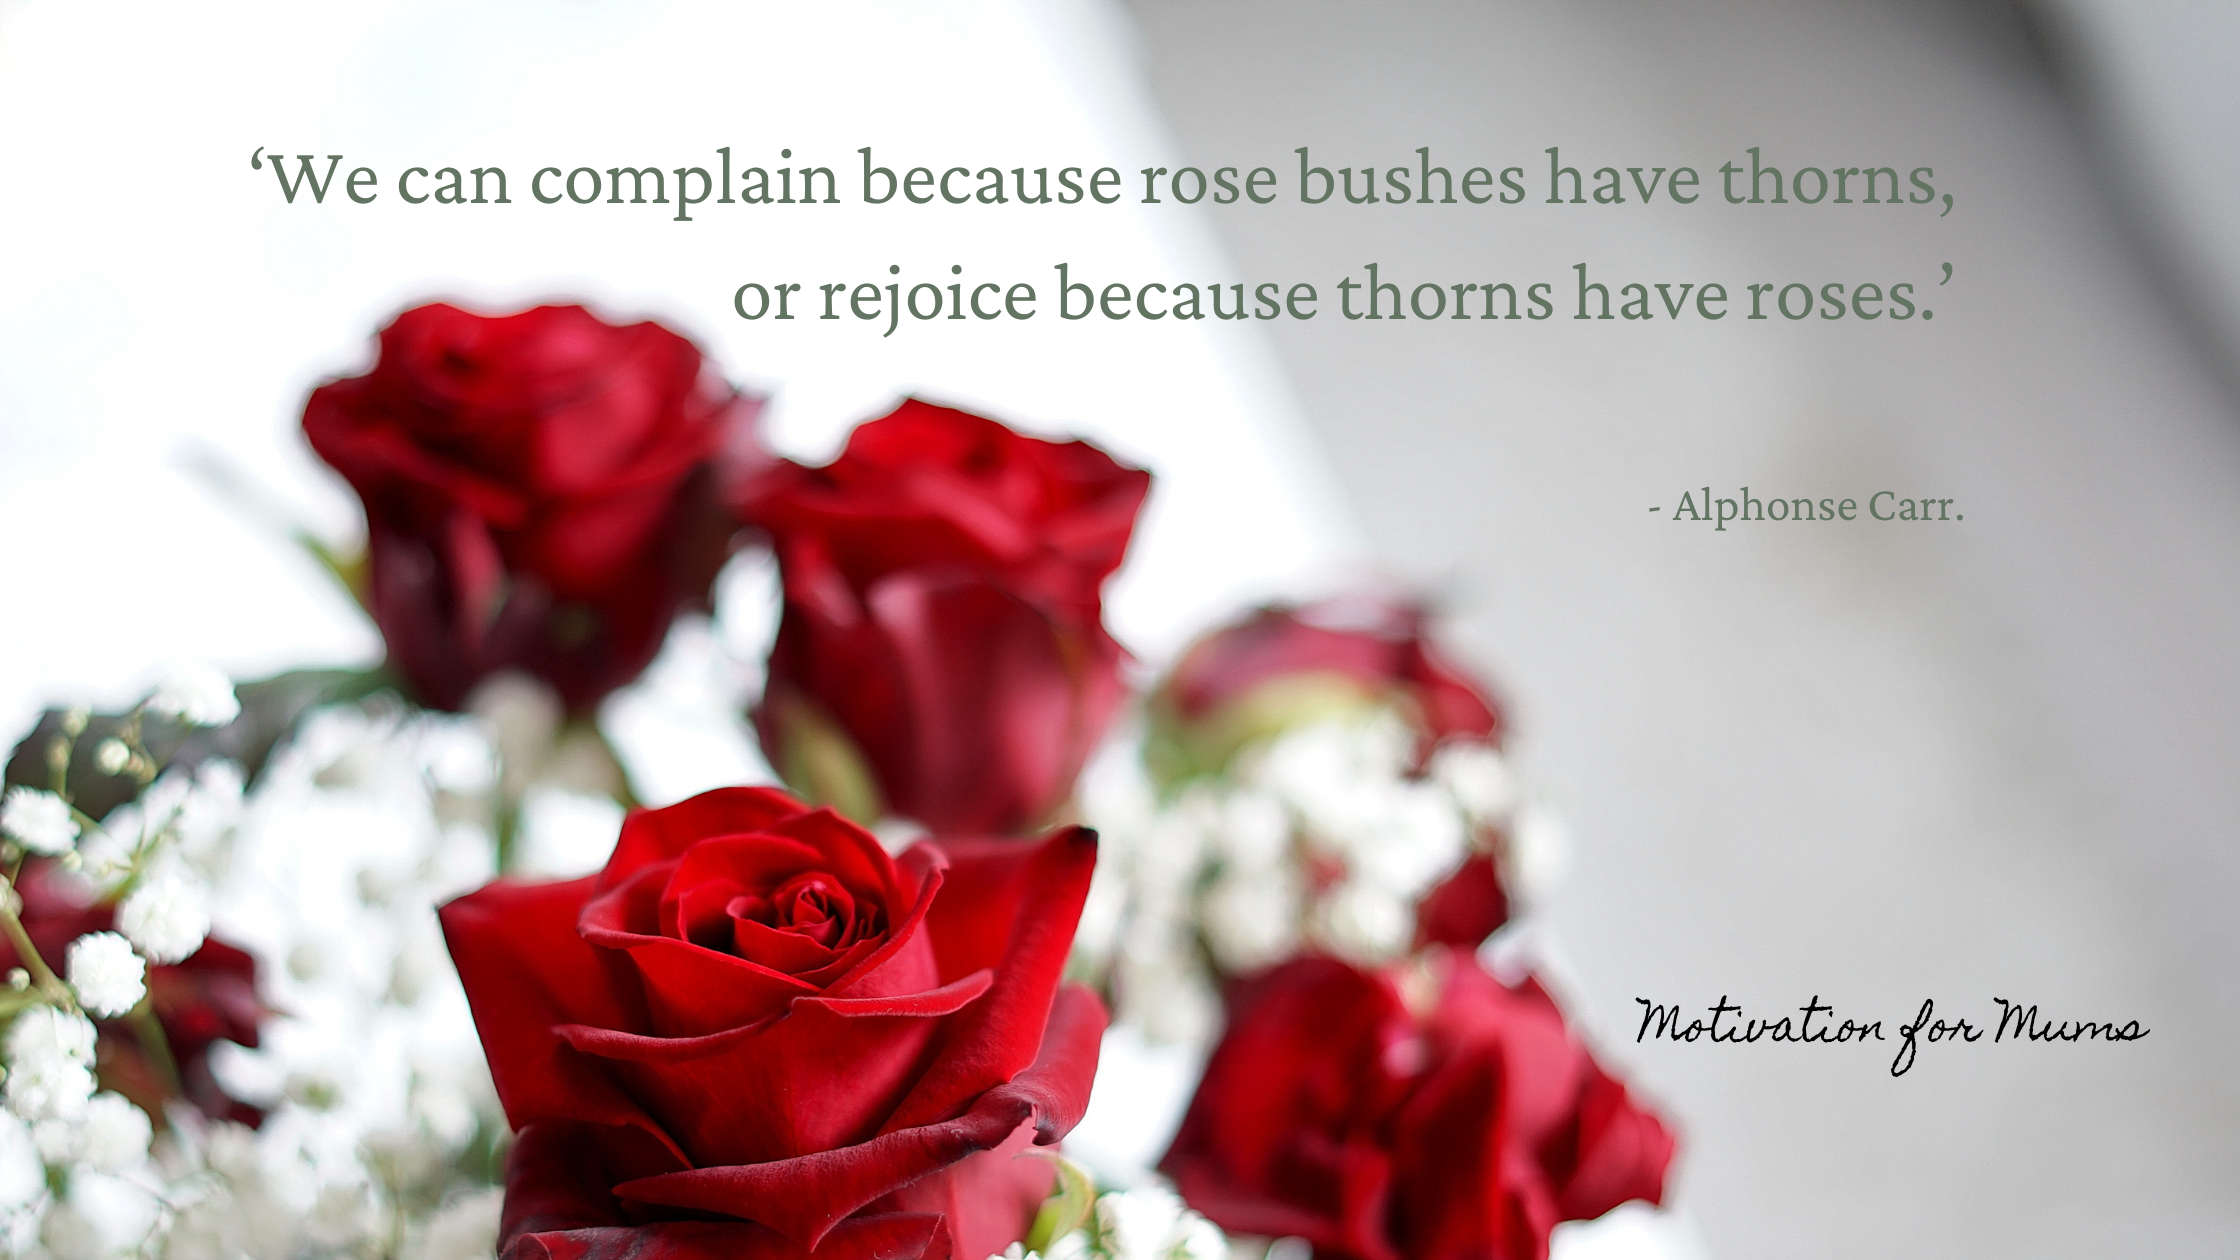 ‘We can complain because rose bushes have thorns, or rejoice because thorns have roses.’ (2)